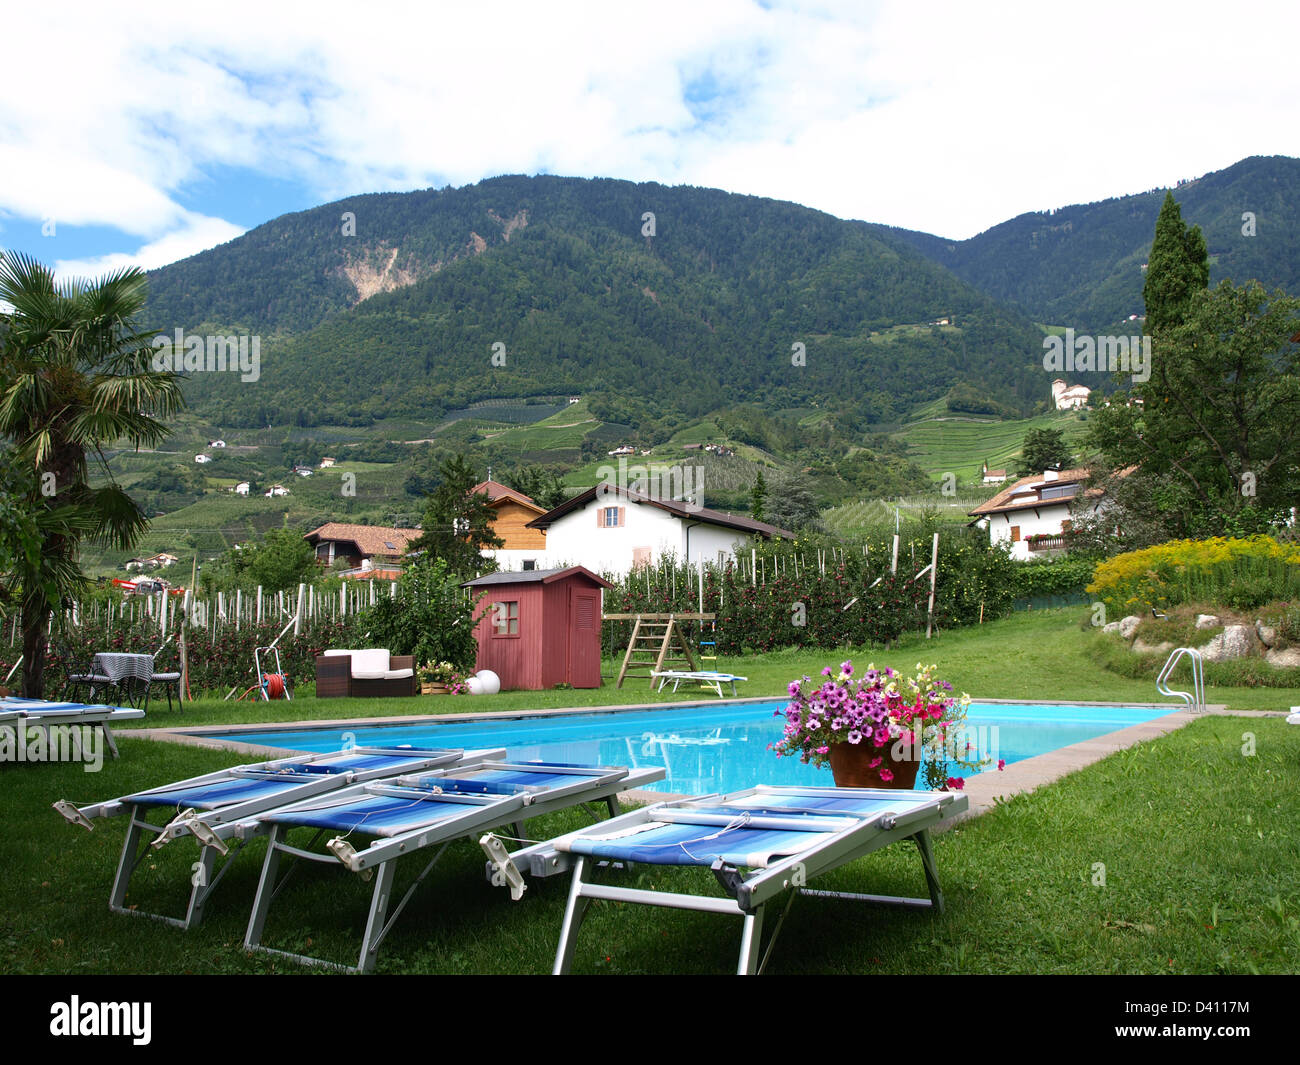 piscina per vacanze in montagna,swimming pool for holidays in the mountains Stock Photo